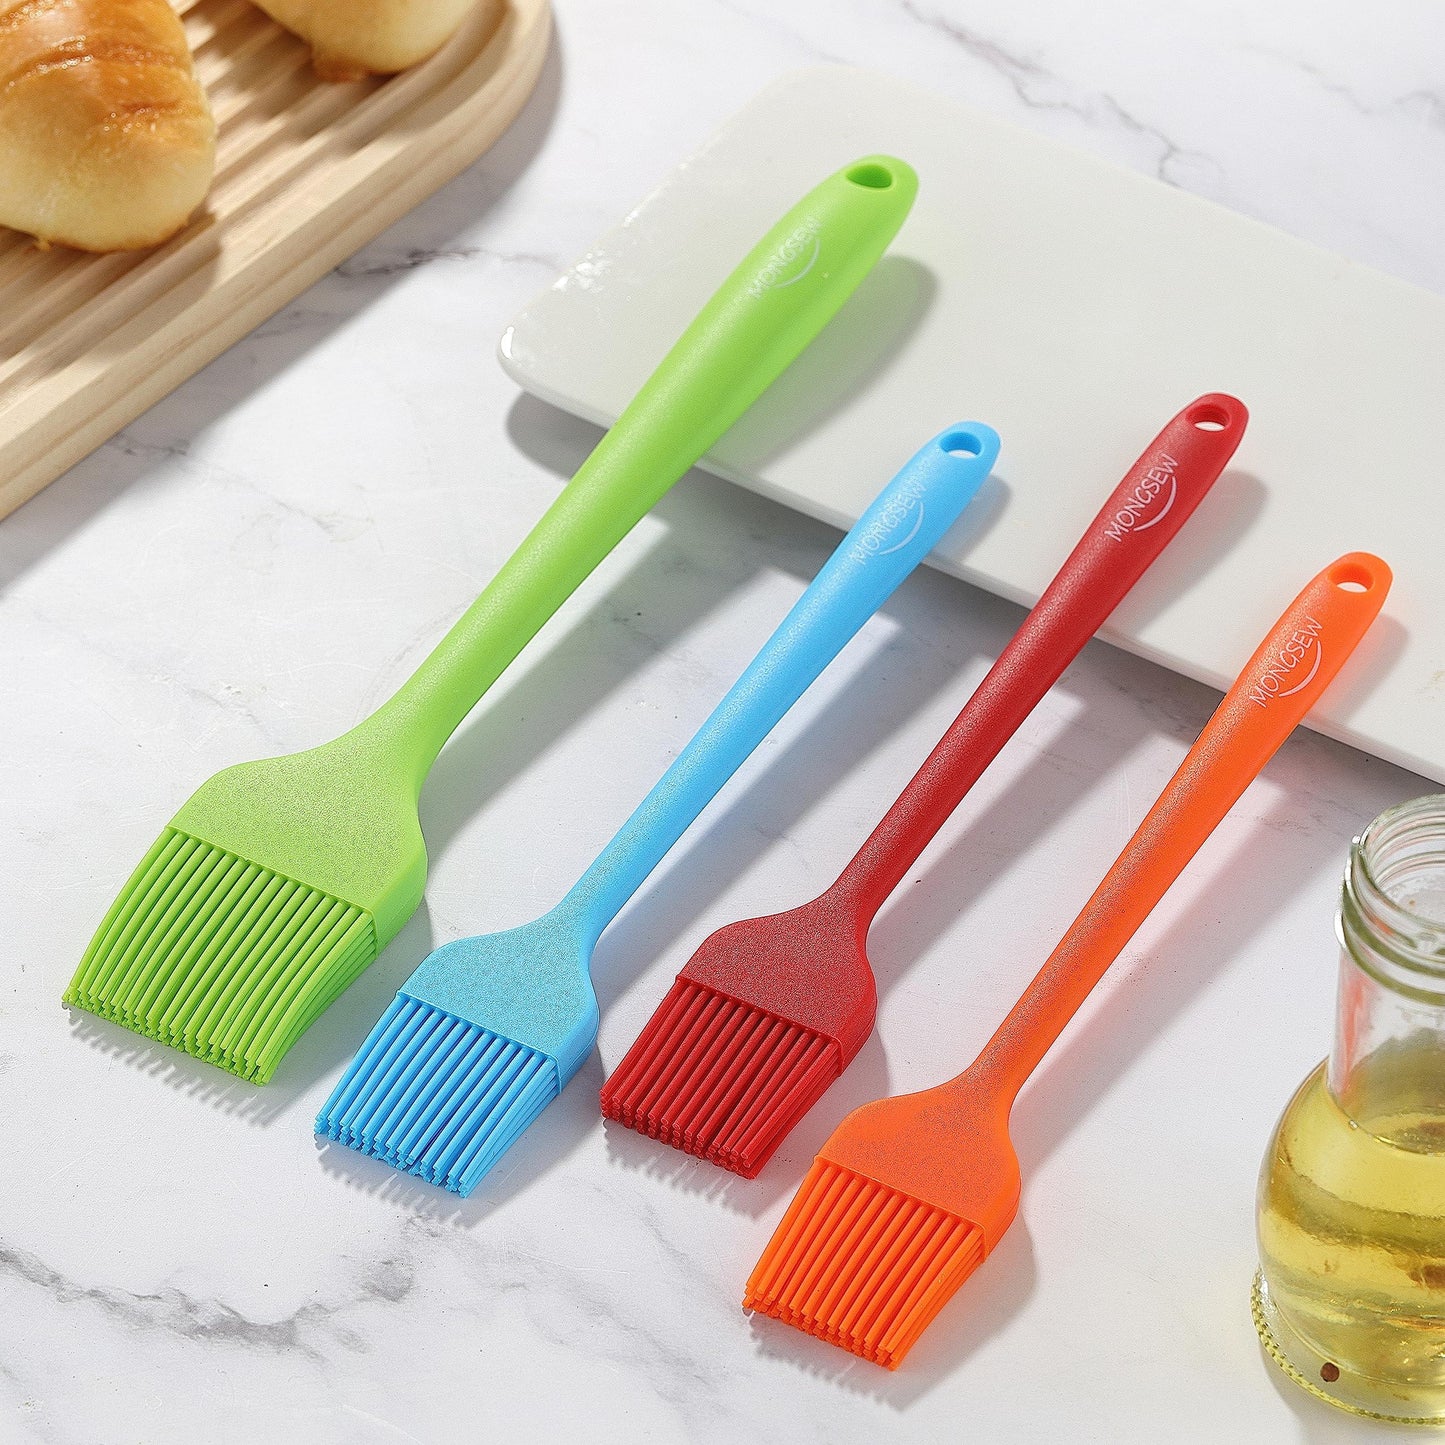 4PCS Silicone Basting Pastry Brush, MONGSEW Heat Resistant Food Brush Spread Oil Butter Sauce for BBQ Grill Baking Kitchen Cooking, BPA Free, Dishwasher Safe (Multicolor, 4 Pcs) - CookCave